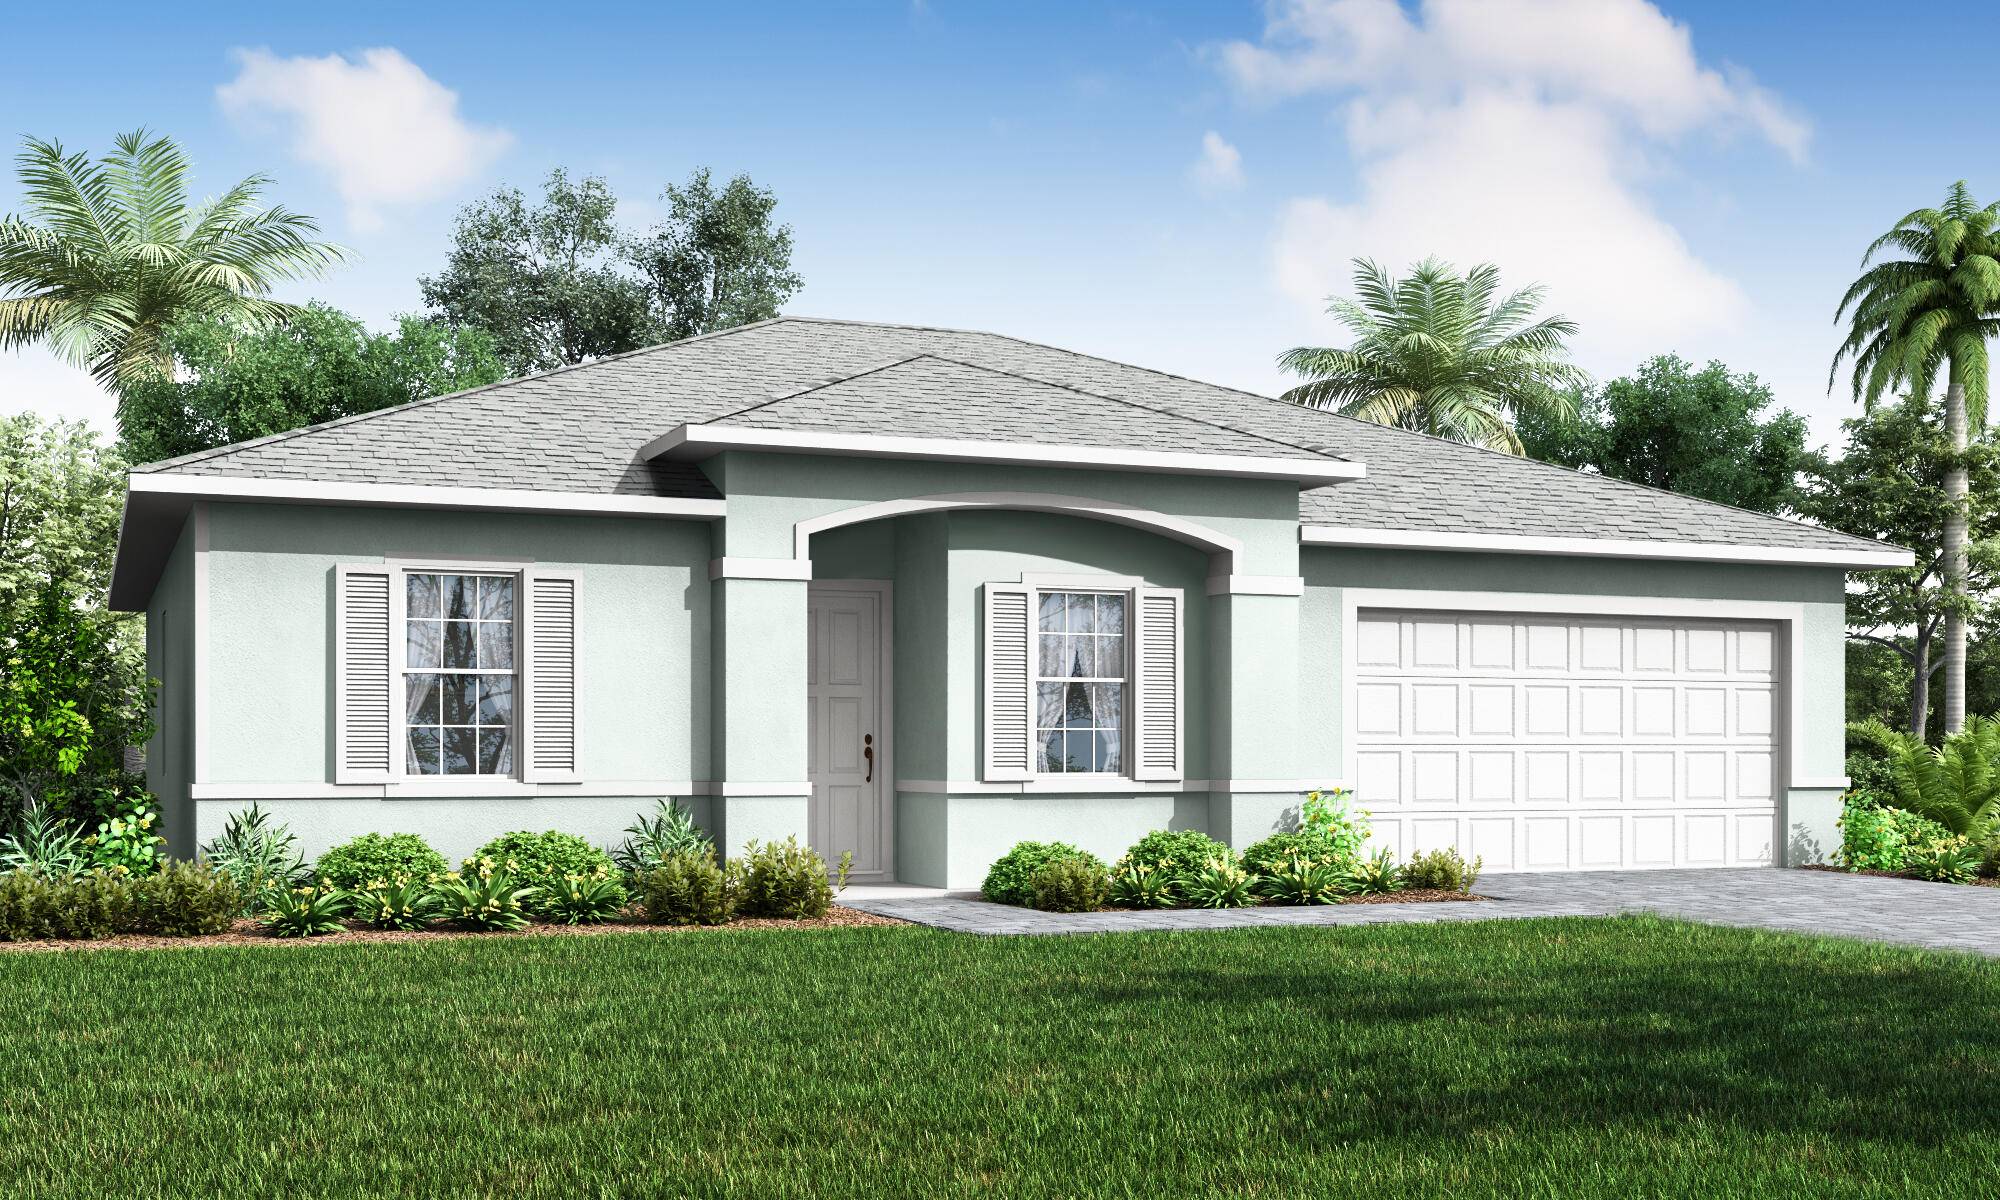 A unique opportunity to own a new construction home in the heart of Jupiter.